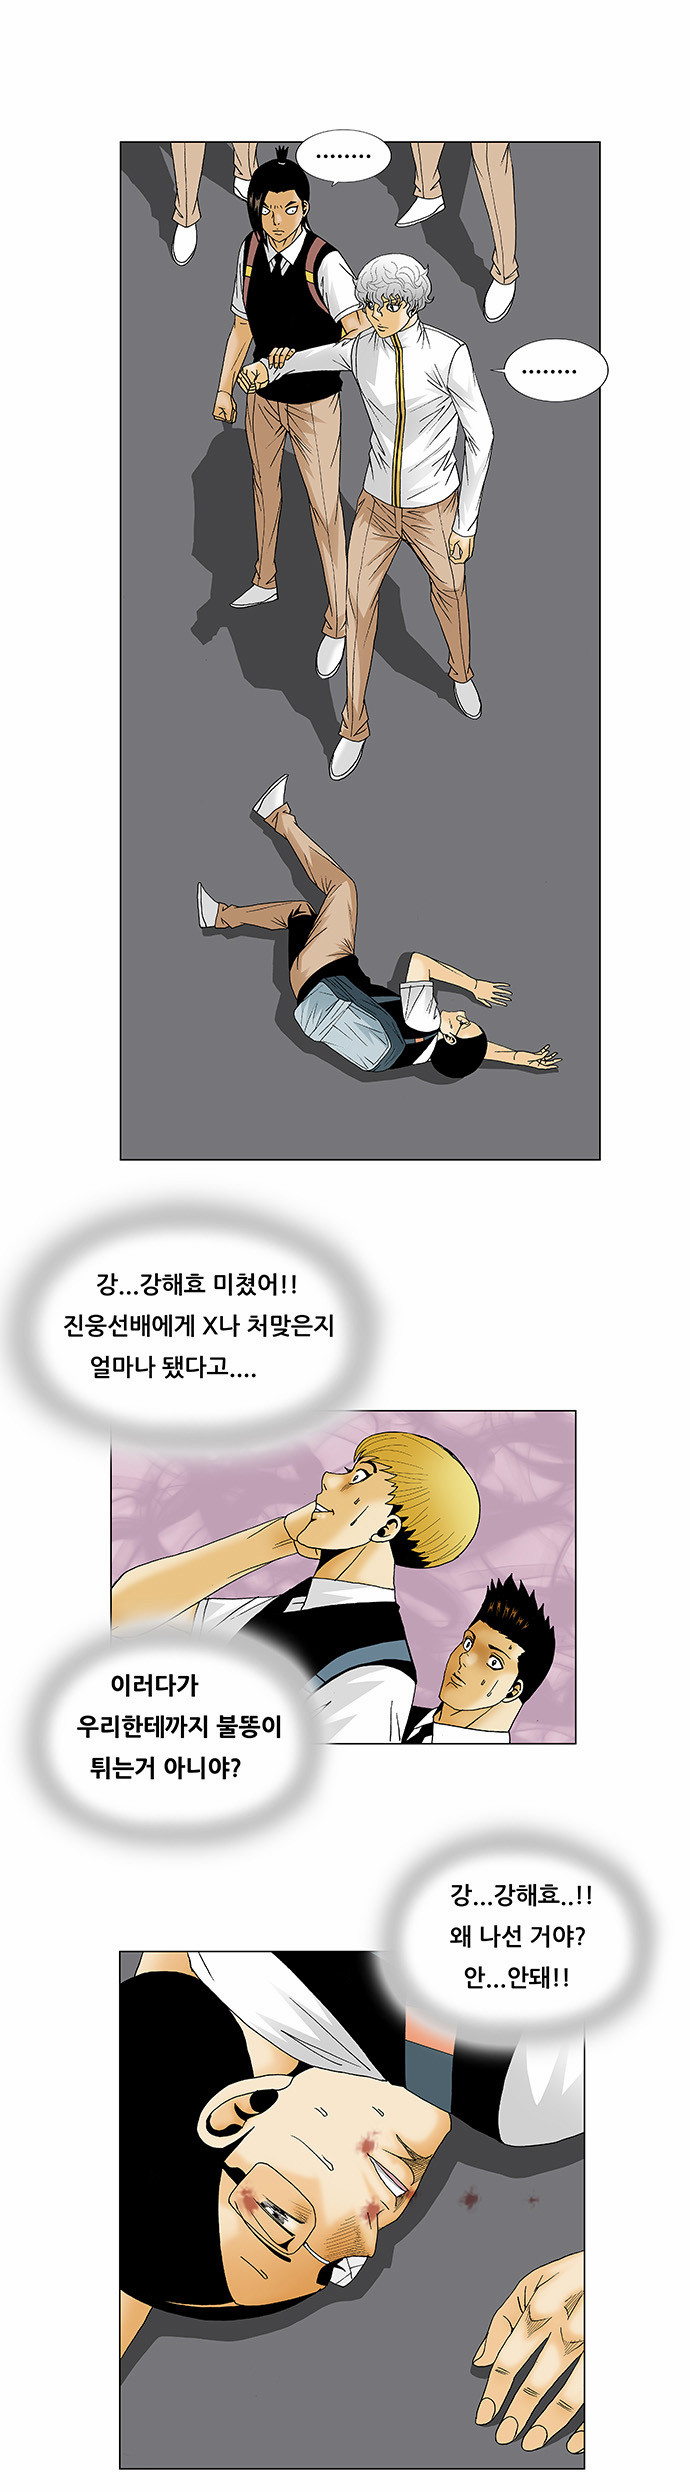 Ultimate Legend - Kang Hae Hyo - Chapter 127 - Page 4